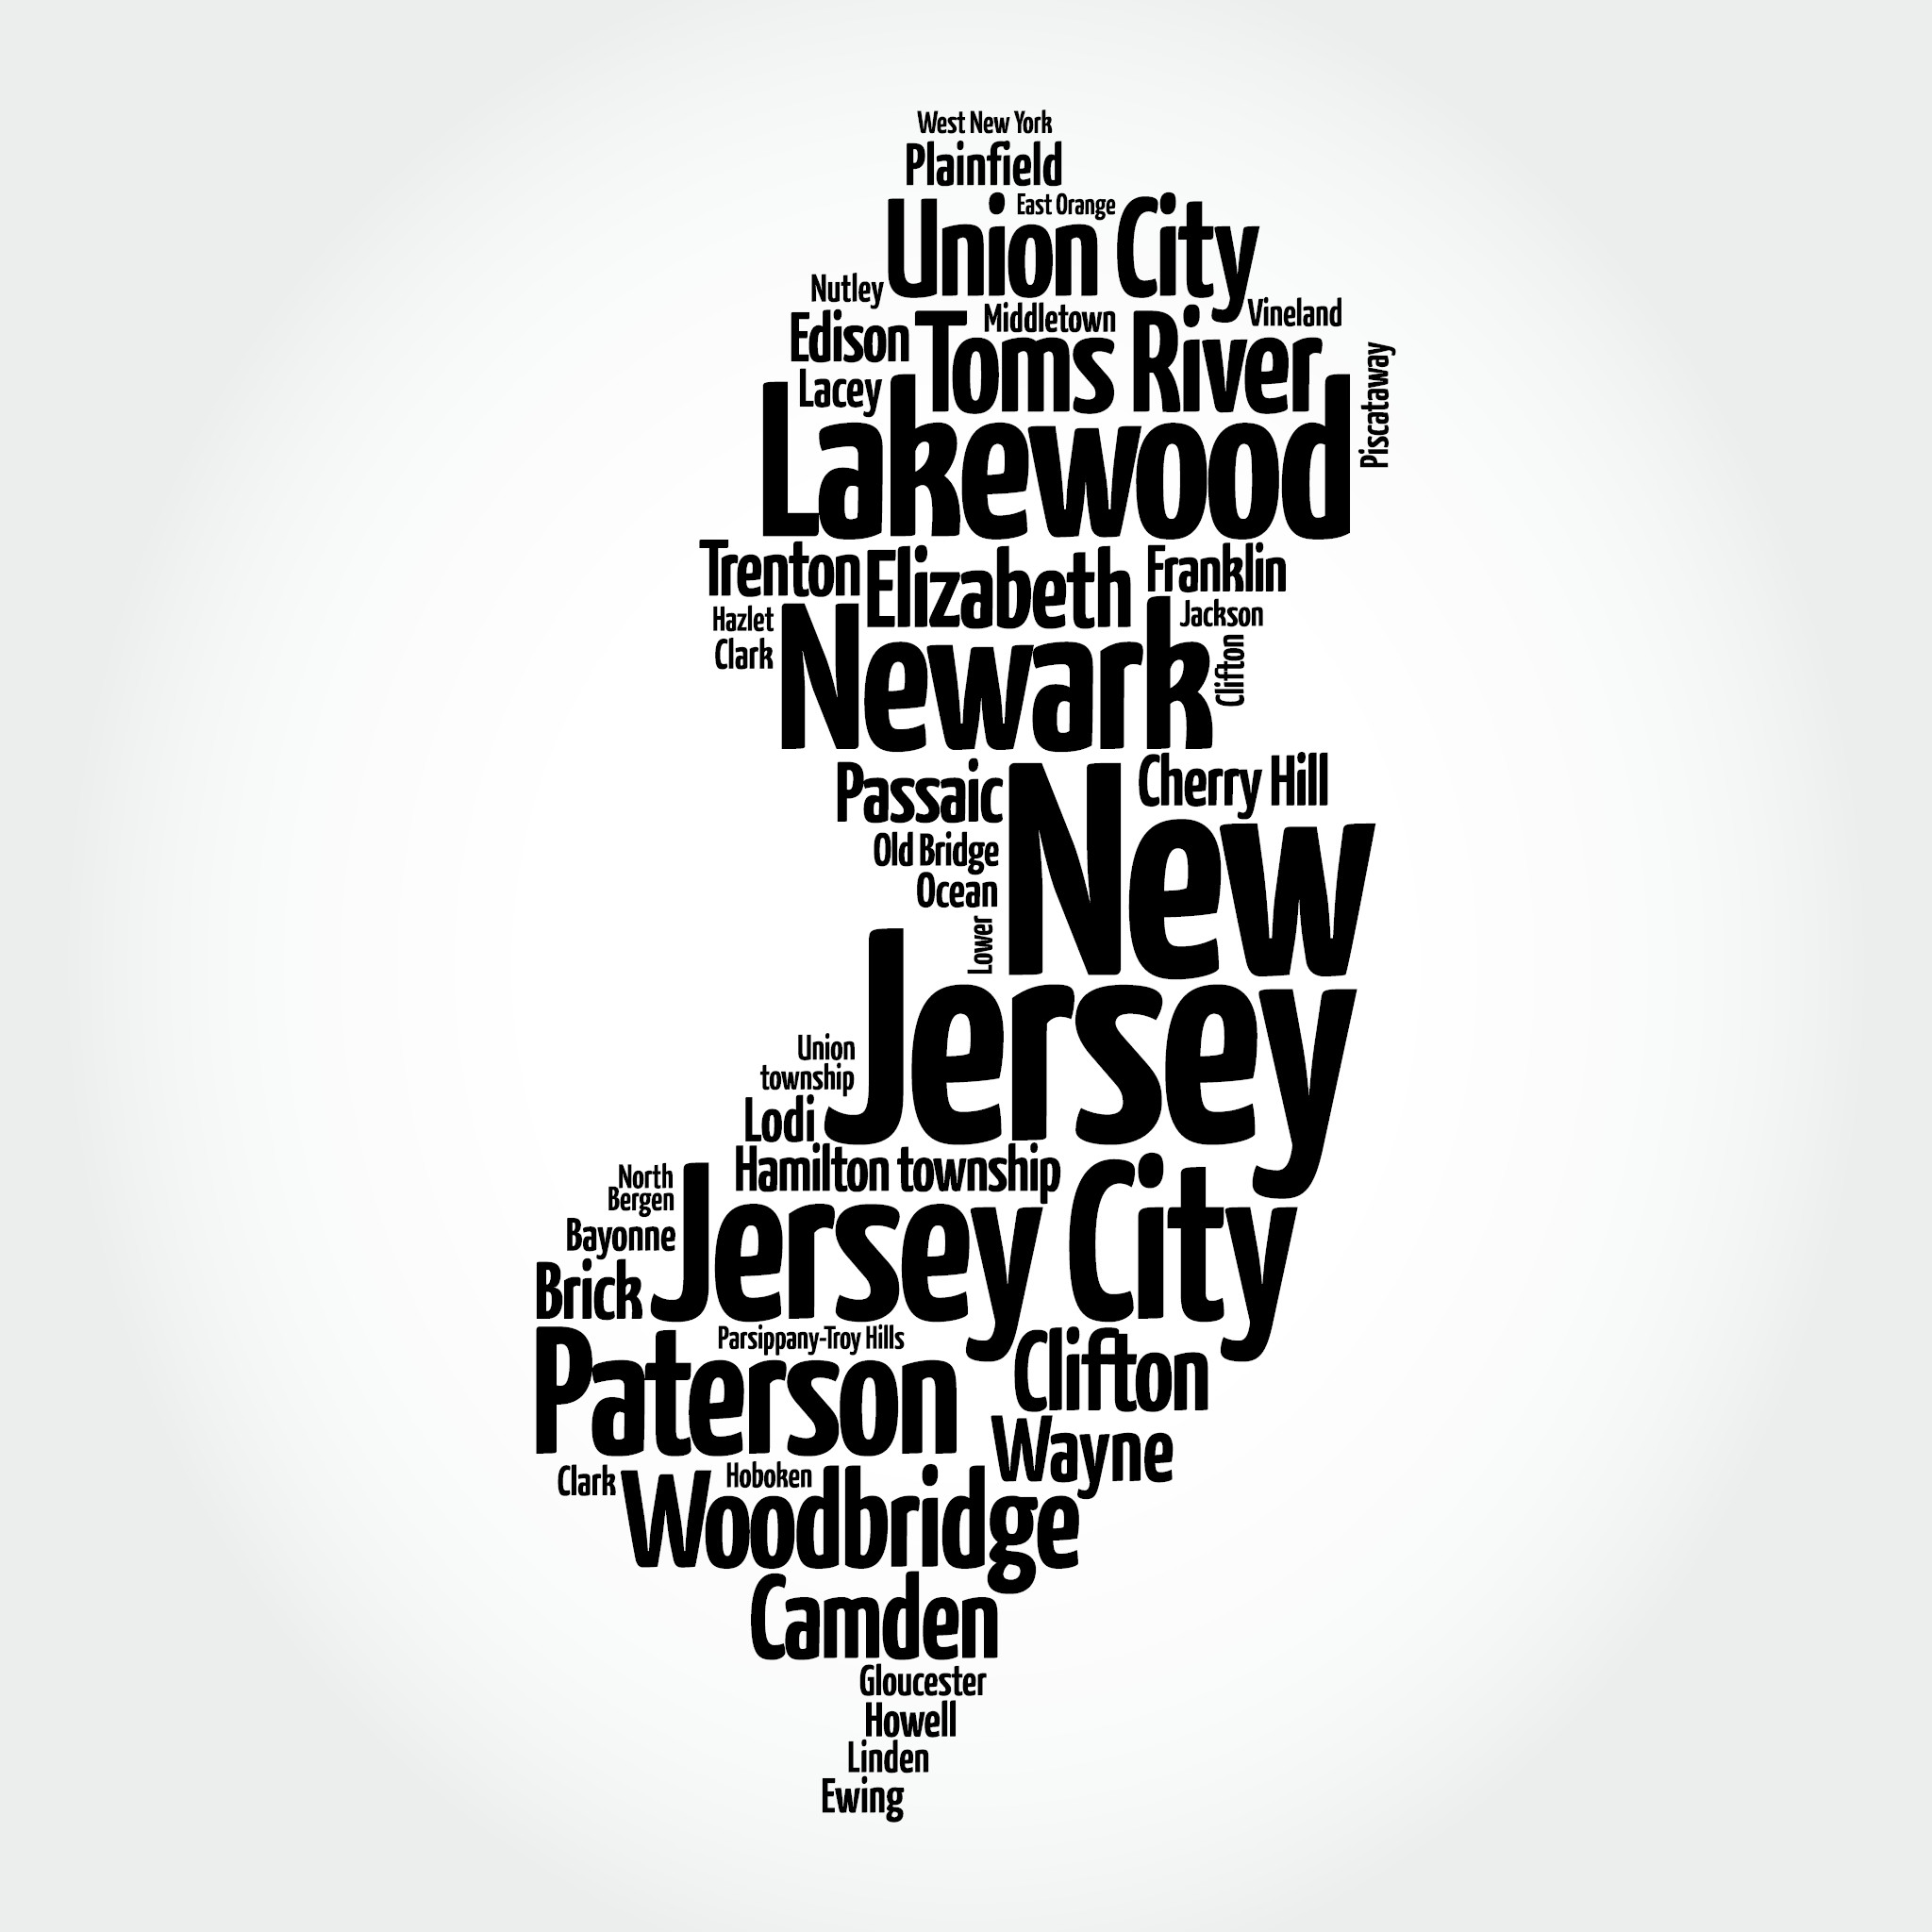 Angel Title Insurance travels throughout New Jersey to close your transaction